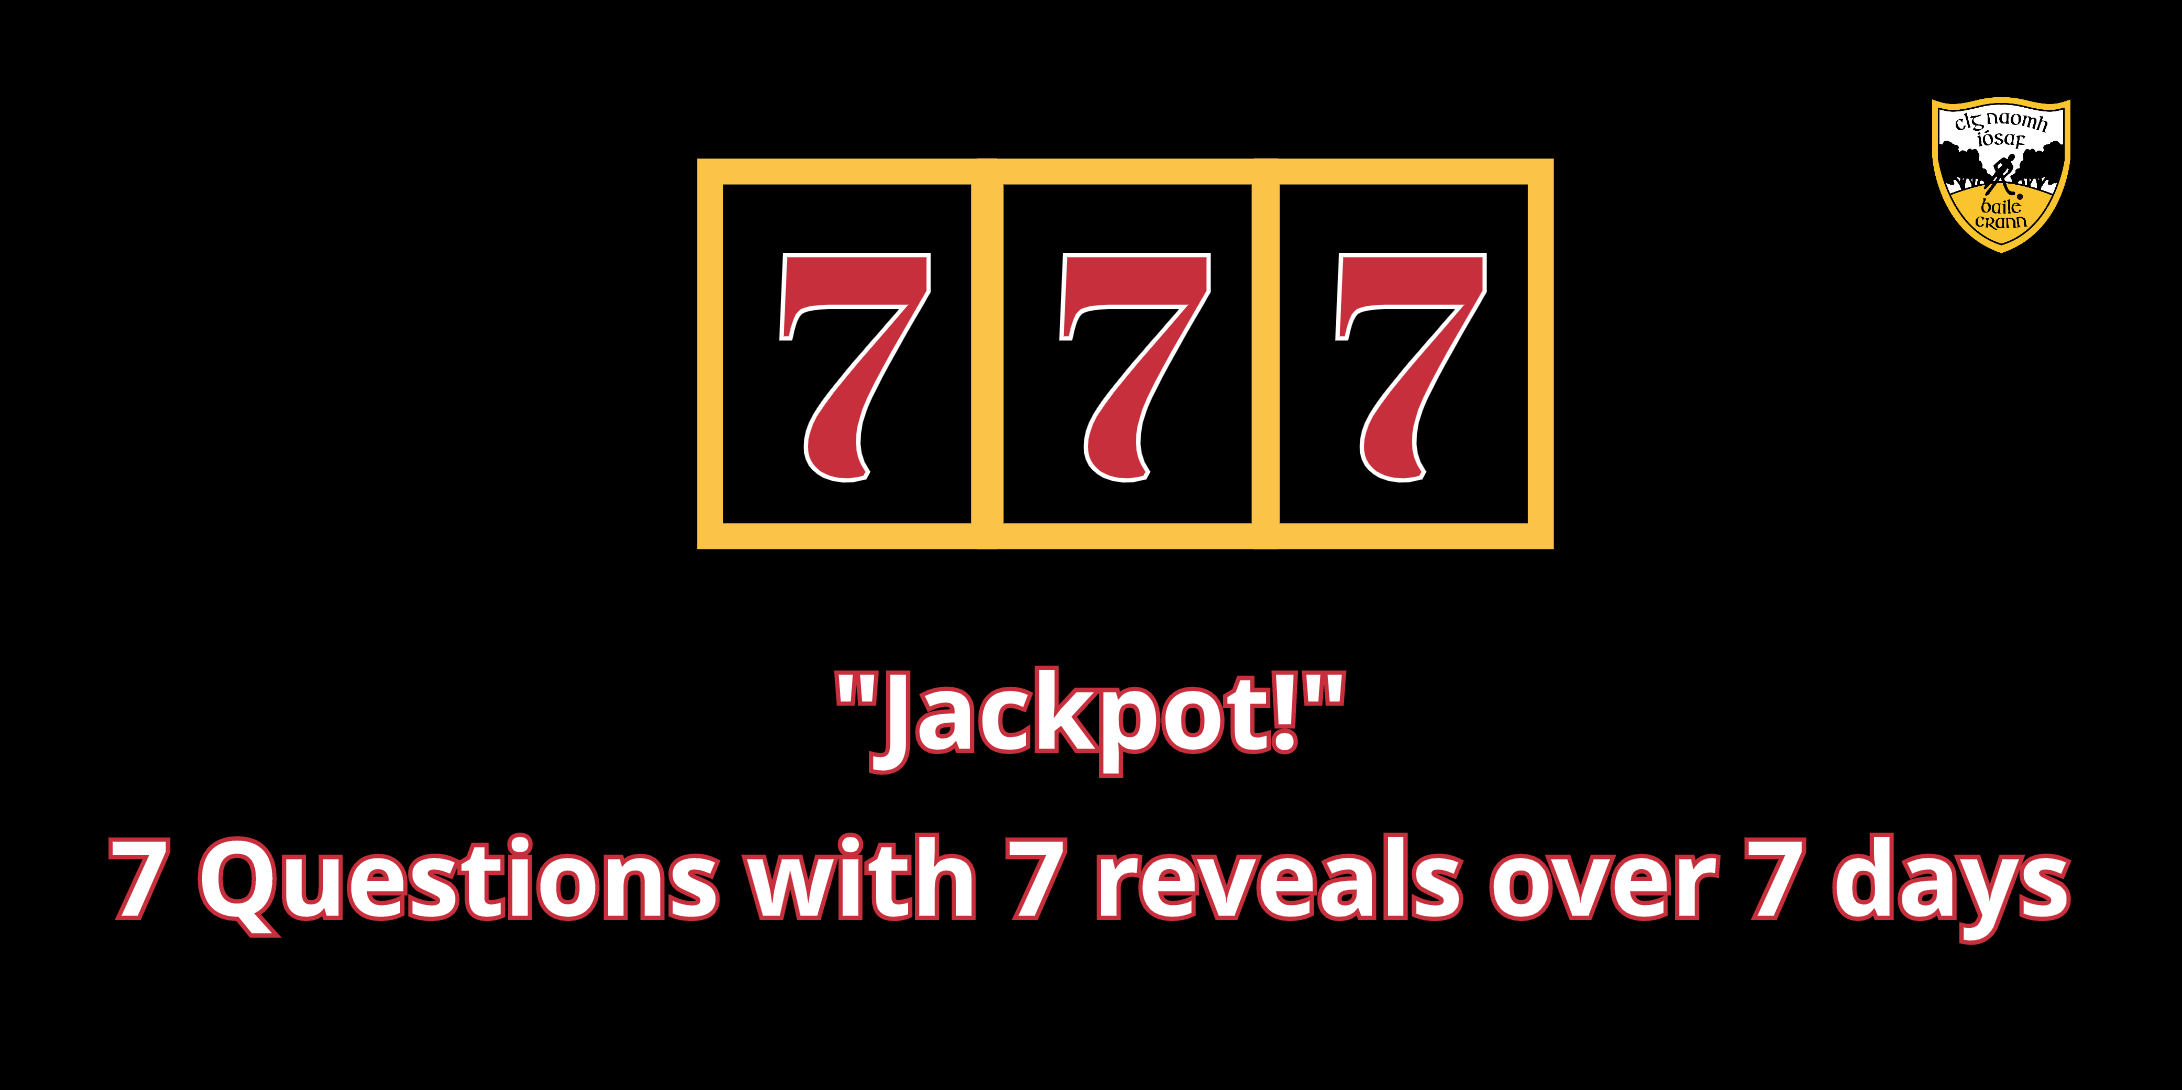 Take seven players, ask them seven questions and reveal the answers over seven days – Jackpot!